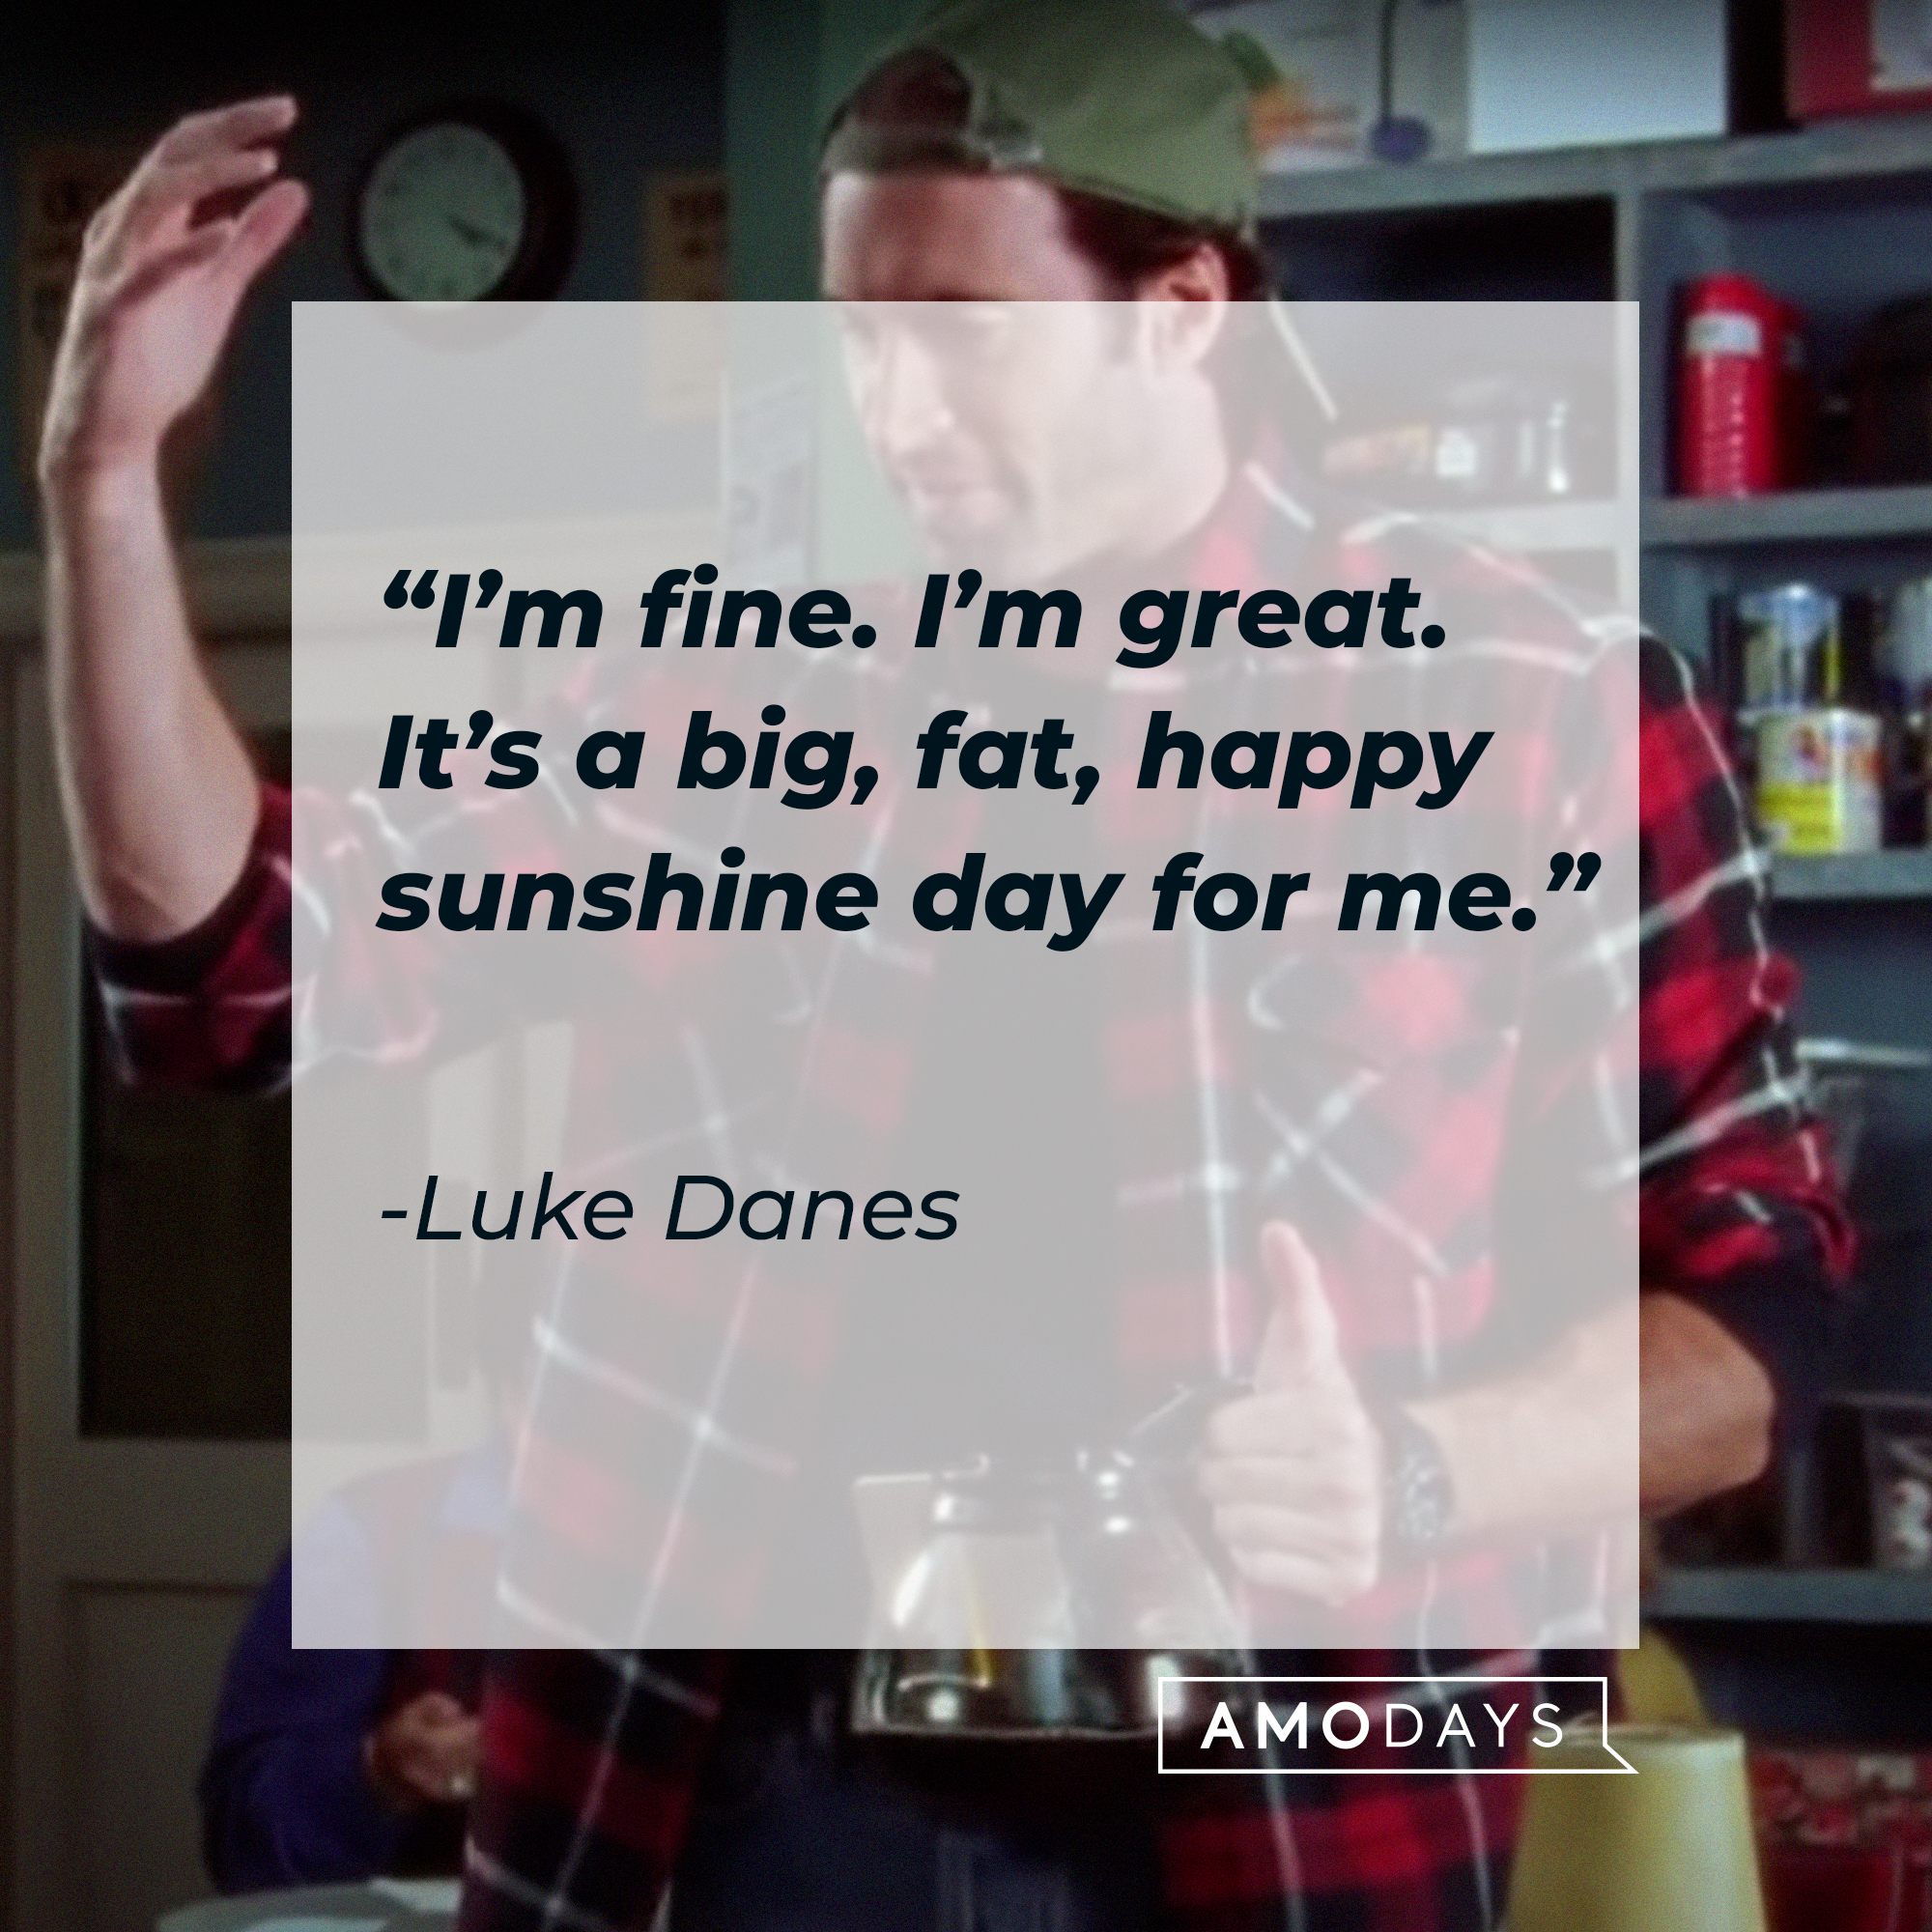 Luke Danes, with his quote: “I’m fine. I’m great. It’s a big, fat, happy sunshine day for me.” | Source: facebook.com/GilmoreGirls